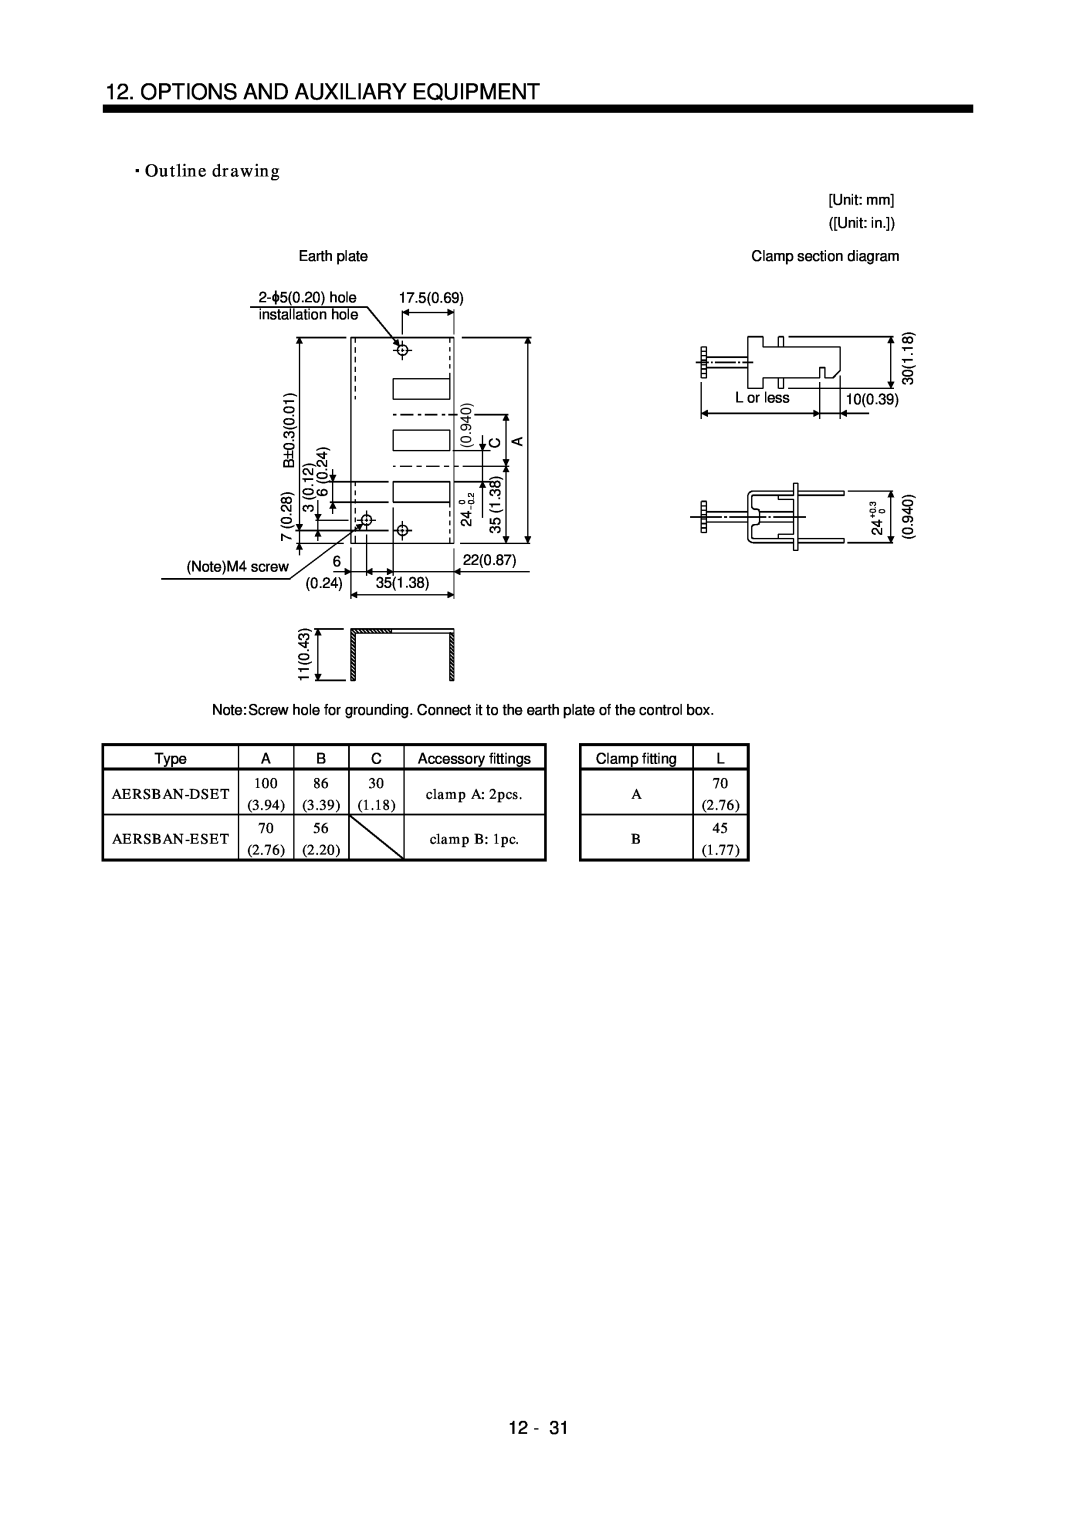 Bose MR-J2S- B instruction manual Options And Auxiliary Equipment, Outline drawing, 12 